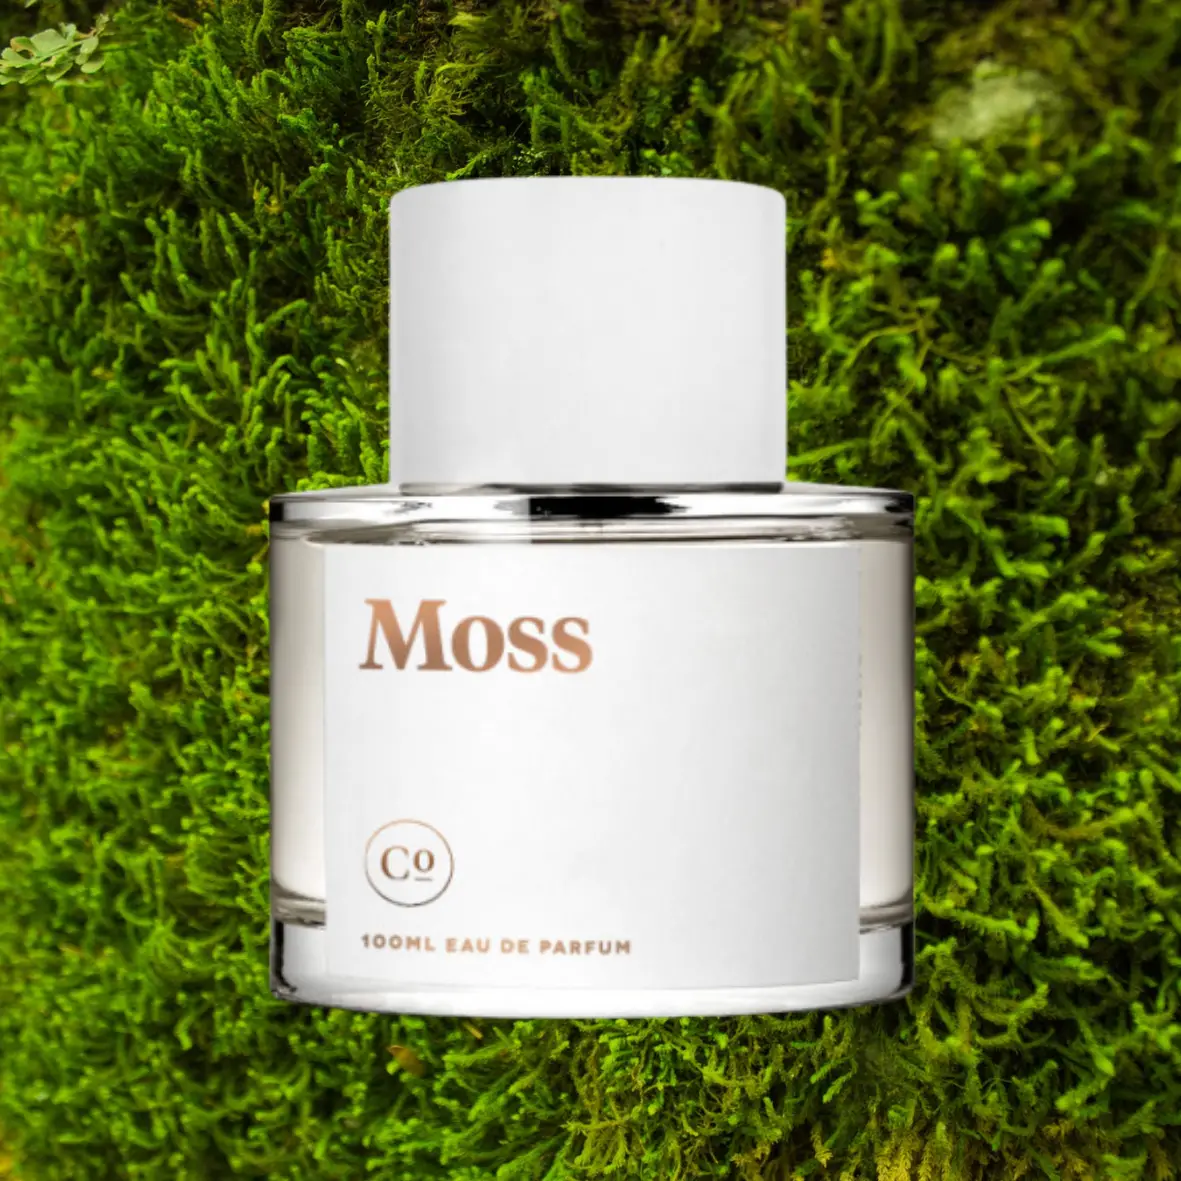 Commodity Moss
Best Green Perfumes